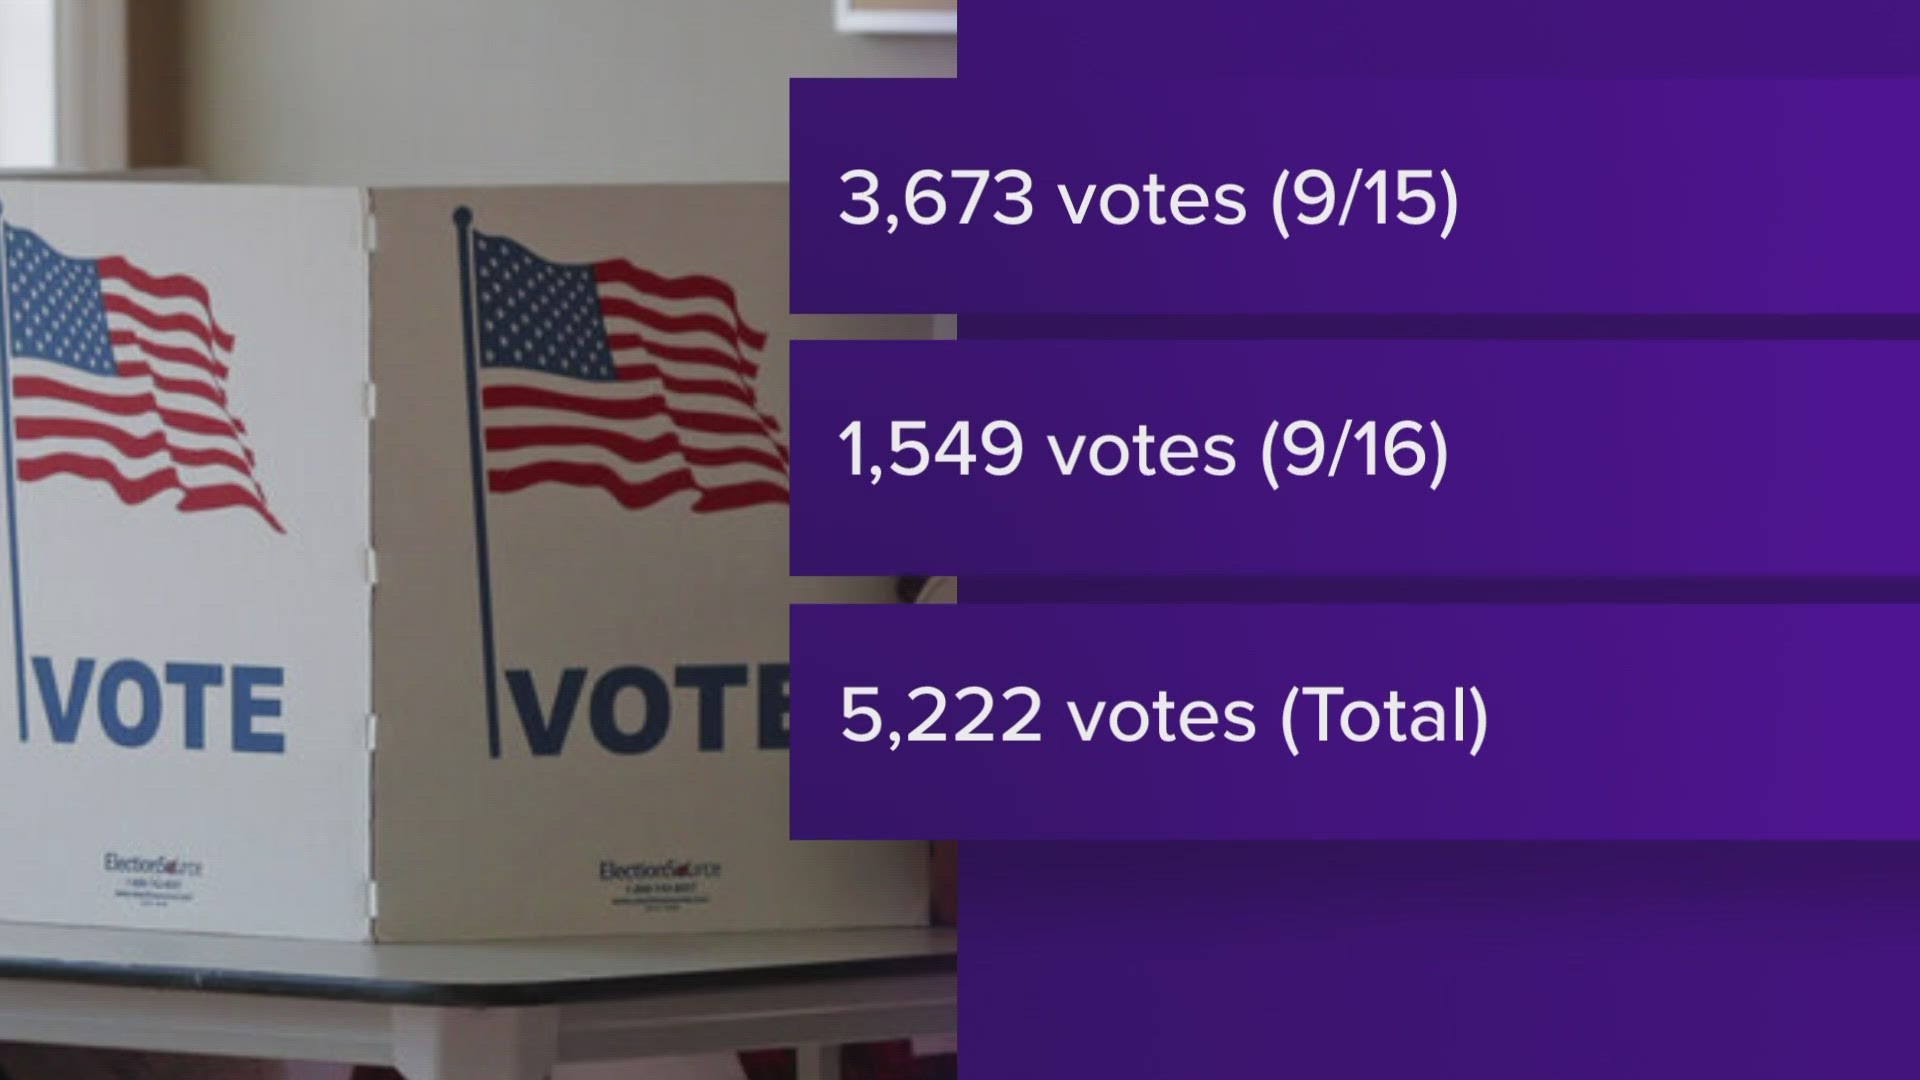 Voting participation numbers are up from the Memphis city election in 2019 and 2015.